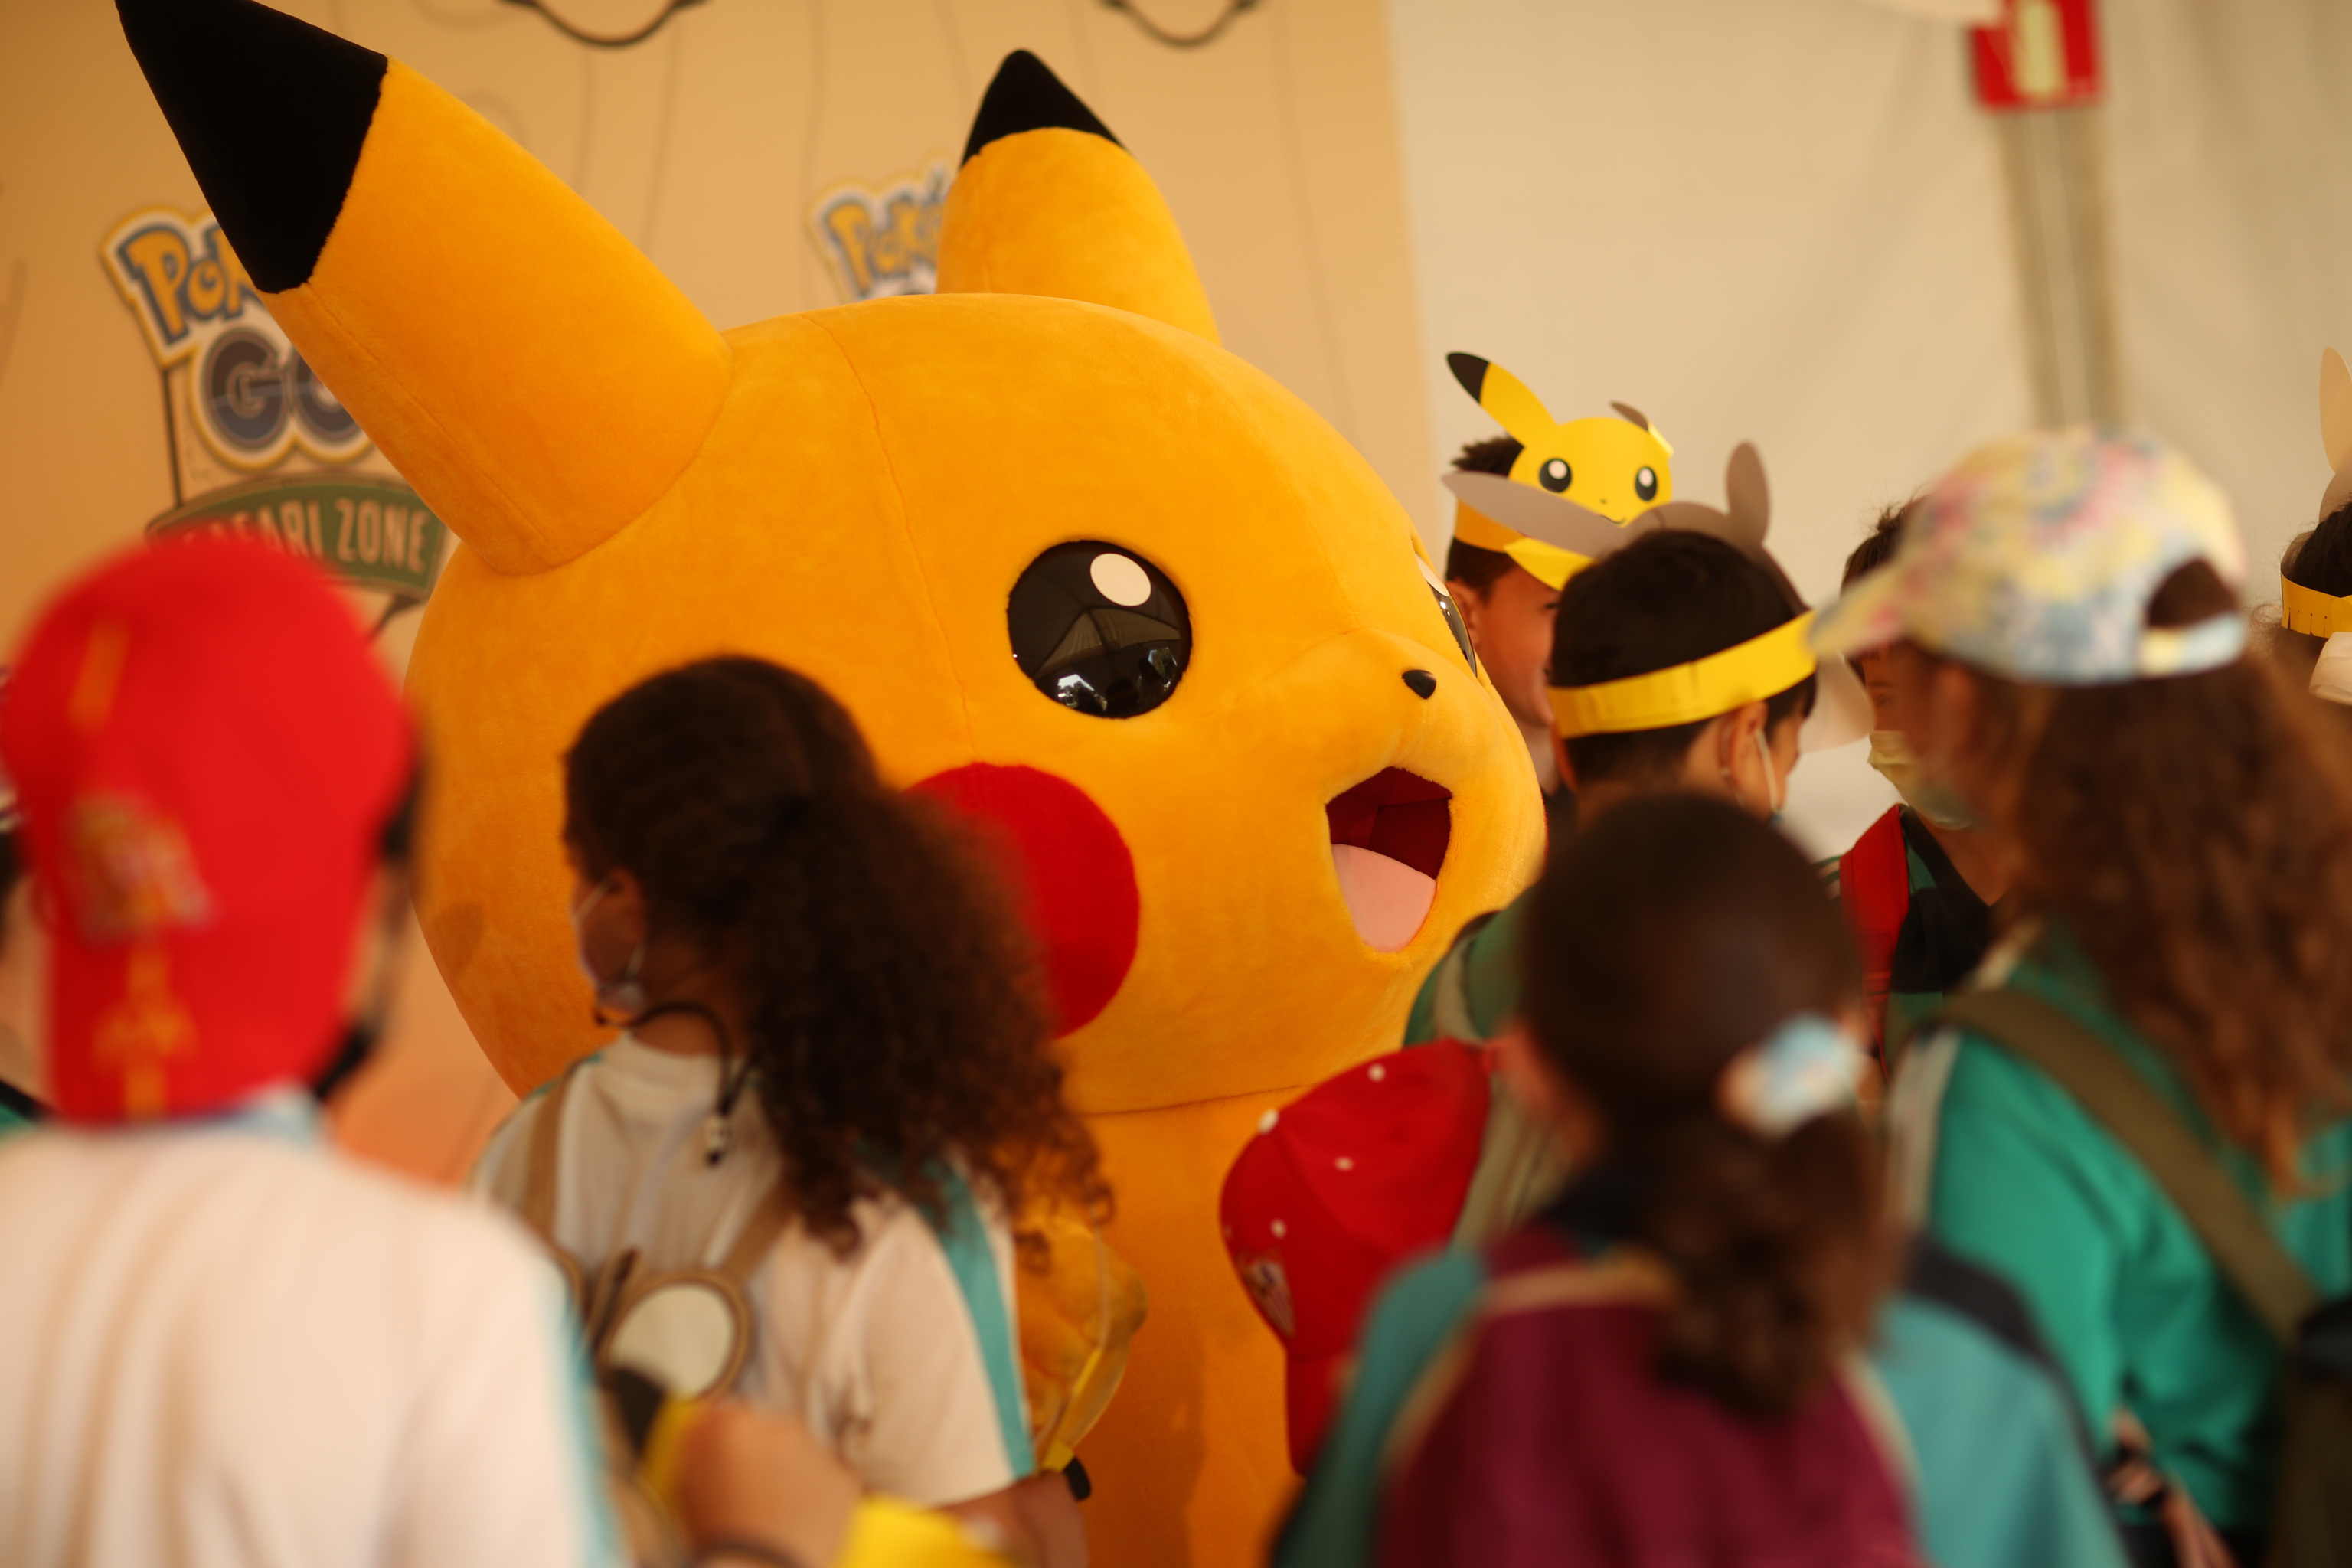 Video game fans next to a figure of Pikachu, one of Poco